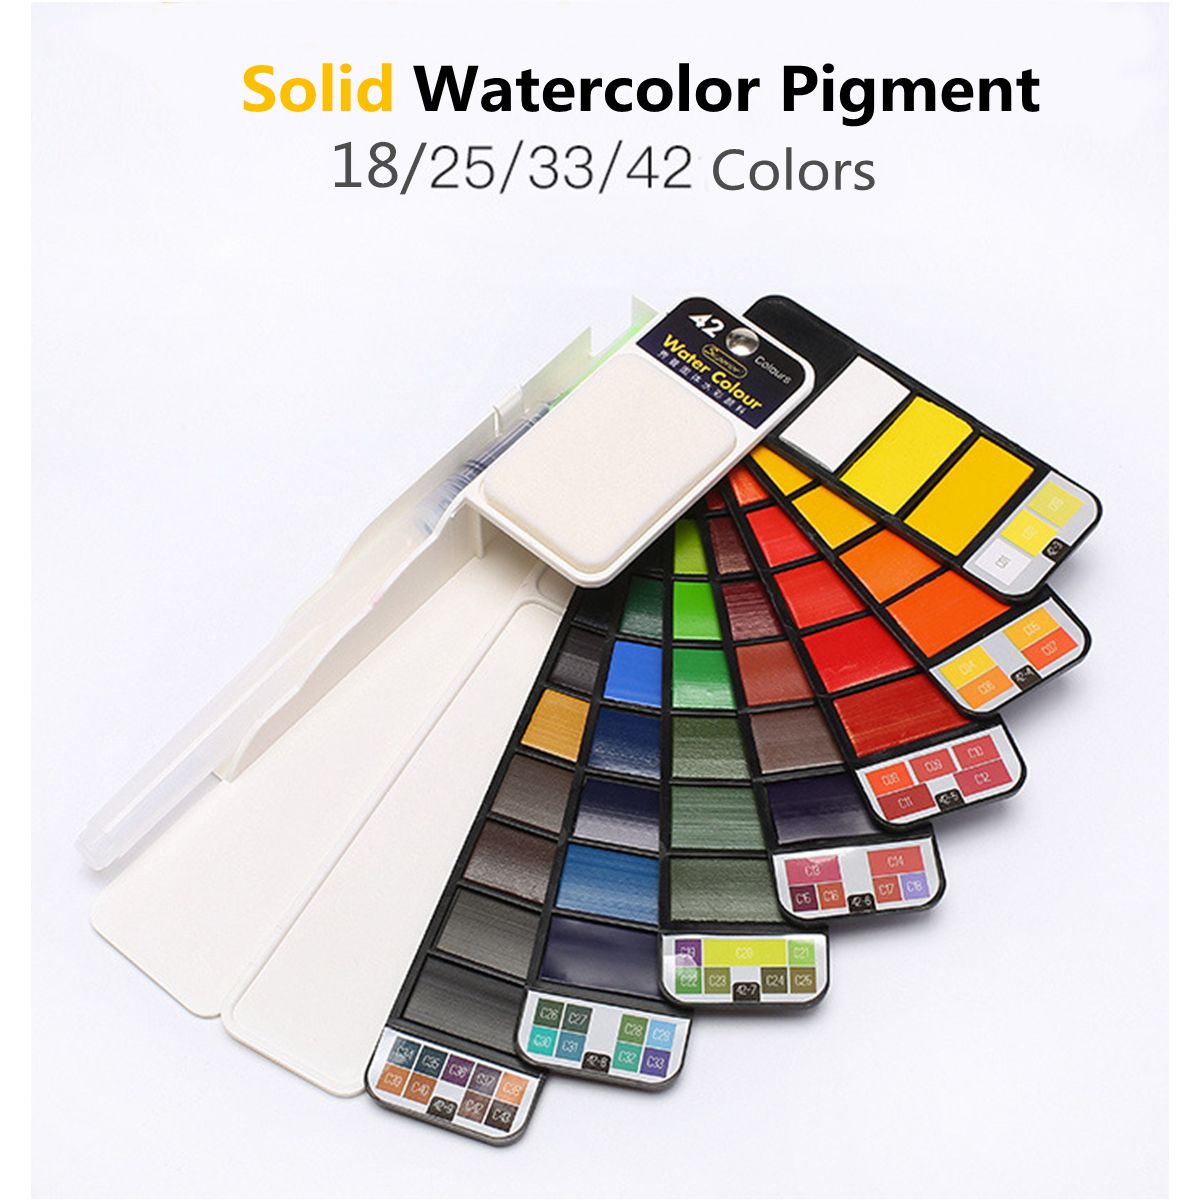 18253342-Acrylic-Paint-Portable-Solid-Watercolor-Pigment-Paint-Set-w-Water-Brush-1449161